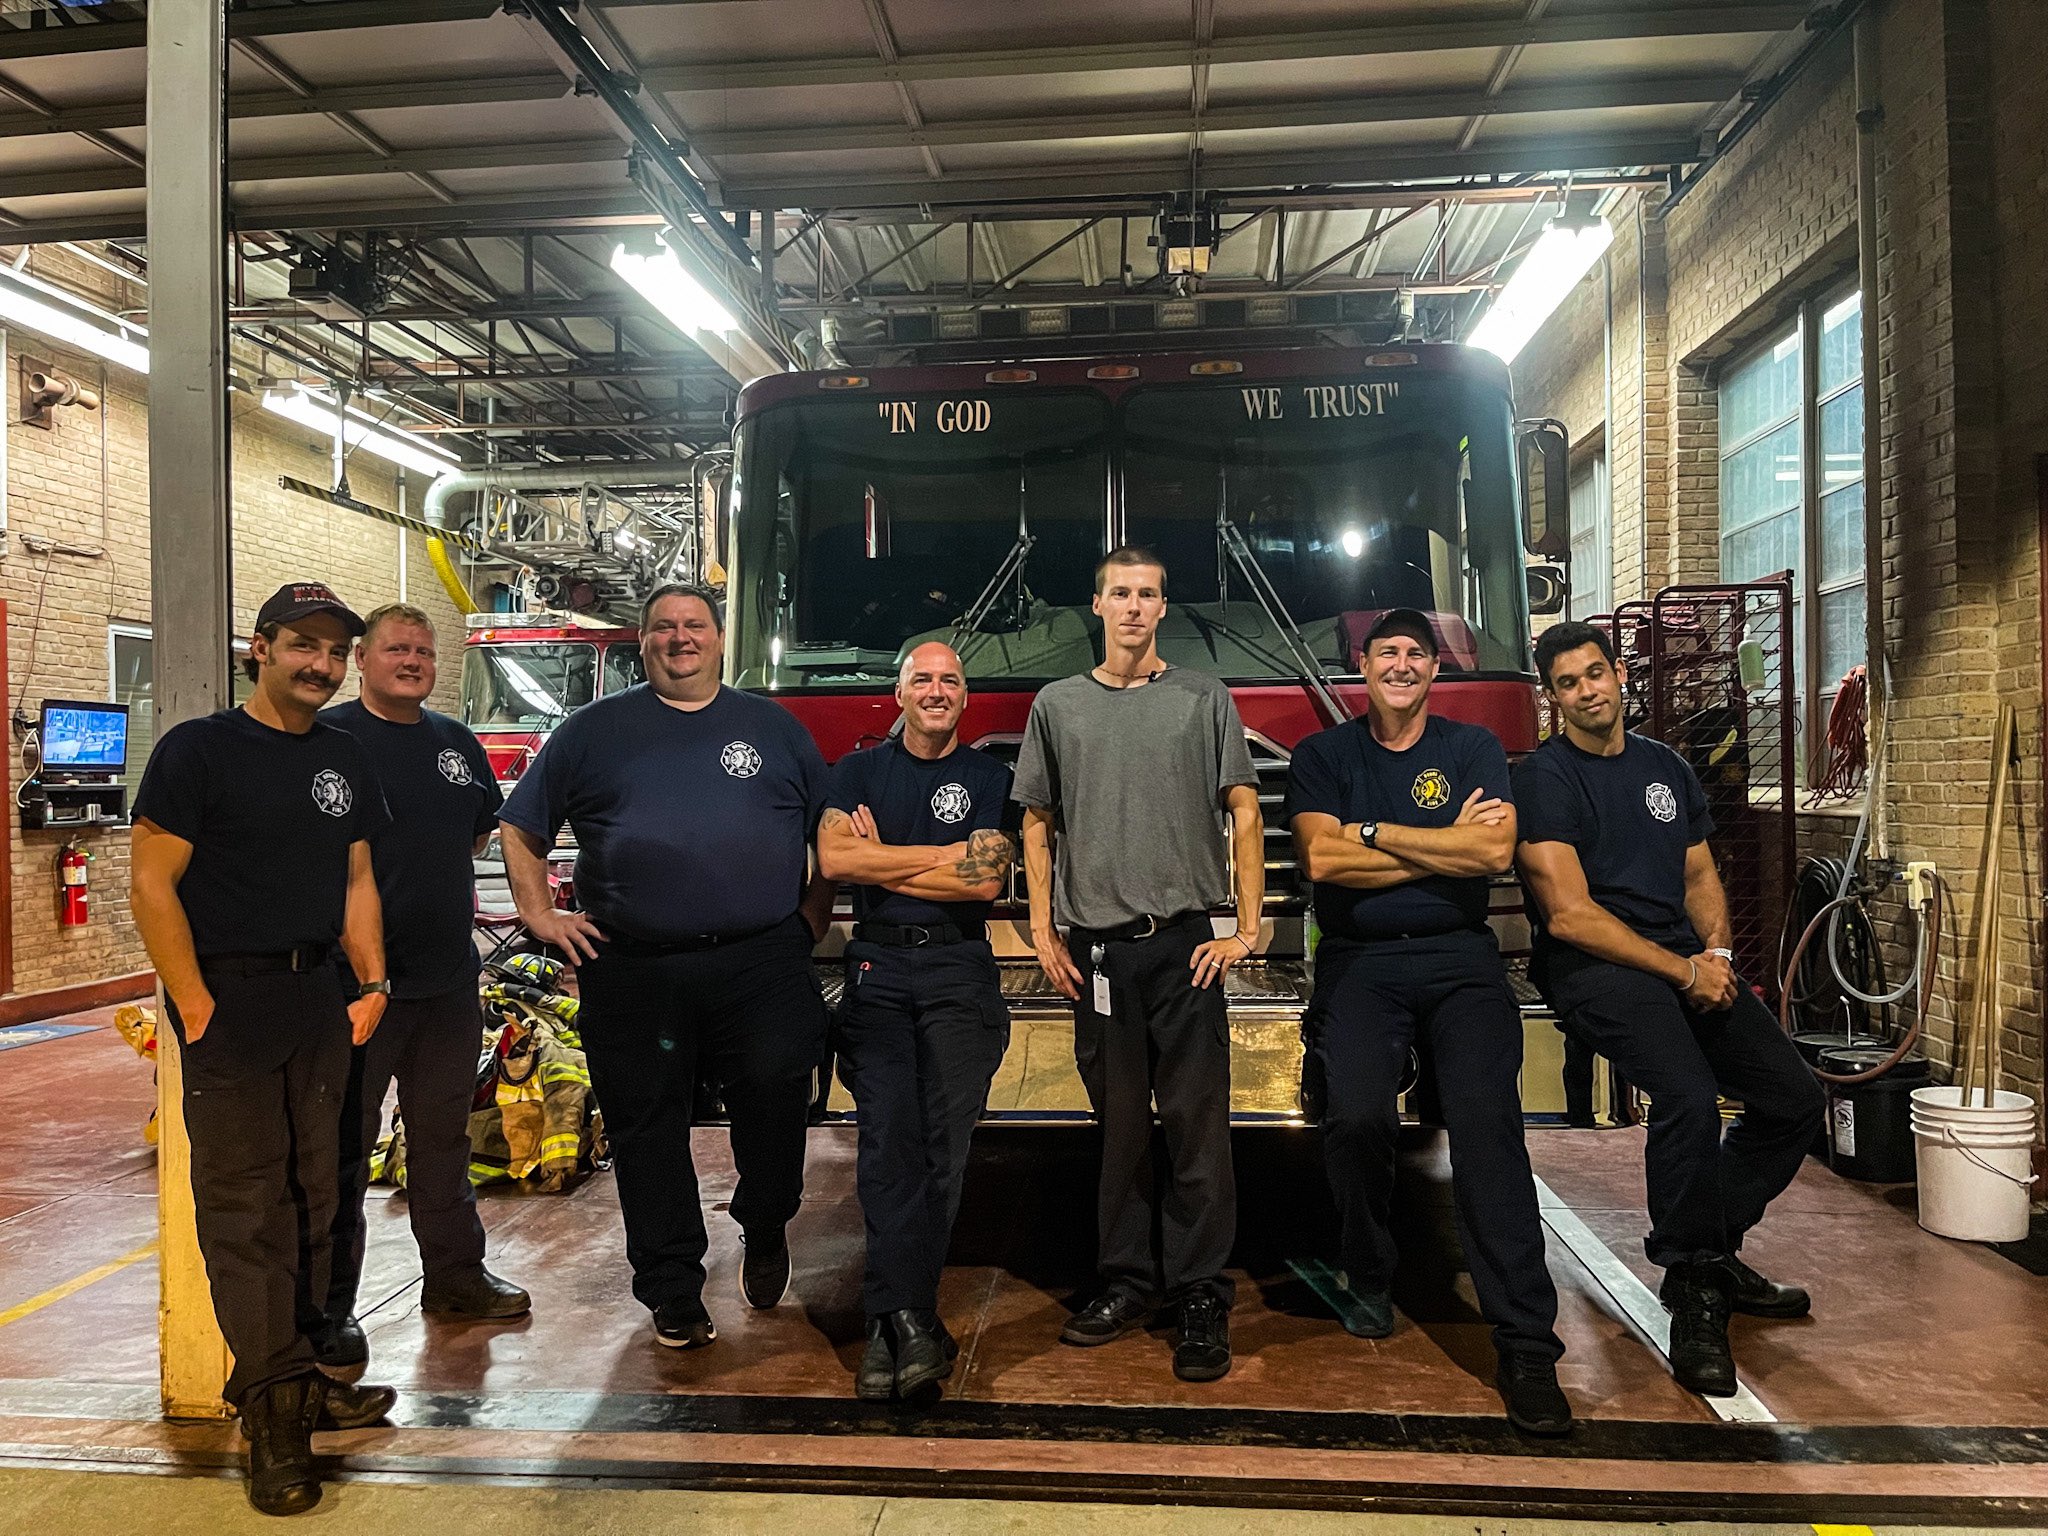 Seks Fest Påhængsmotor Vince Waelti 🌪 on Twitter: "Thank you #Houma FD- Your efforts to restore  your community during #Ida do not go unnoticed. See the full post-  https://t.co/kxBWtwyU6X https://t.co/s5sG9tC4cy" / Twitter